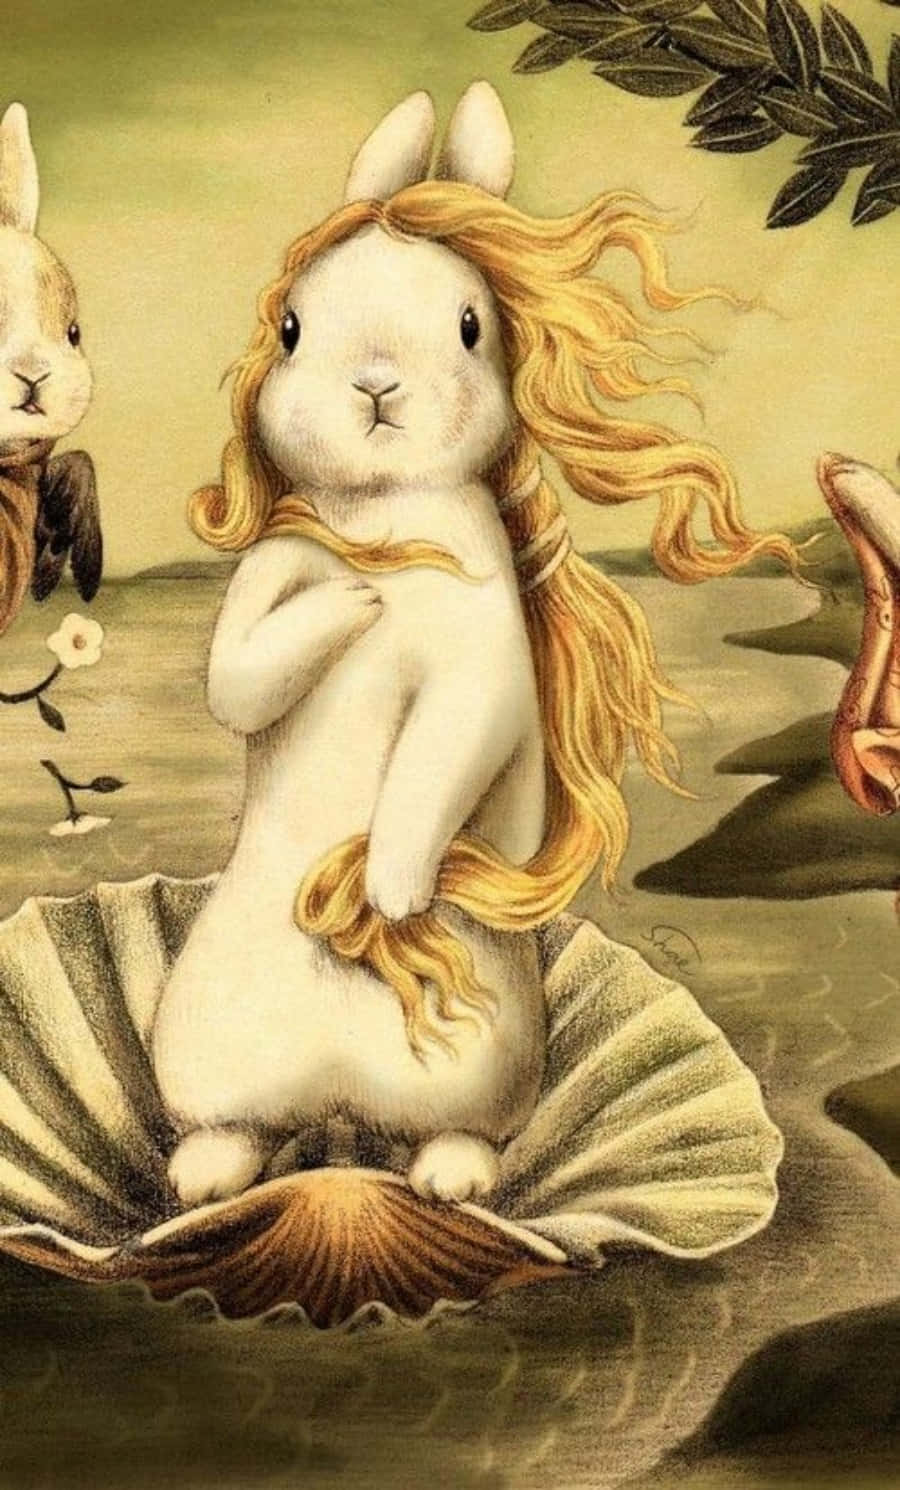 Funny Bunny Picture Birth Of Venus Painting